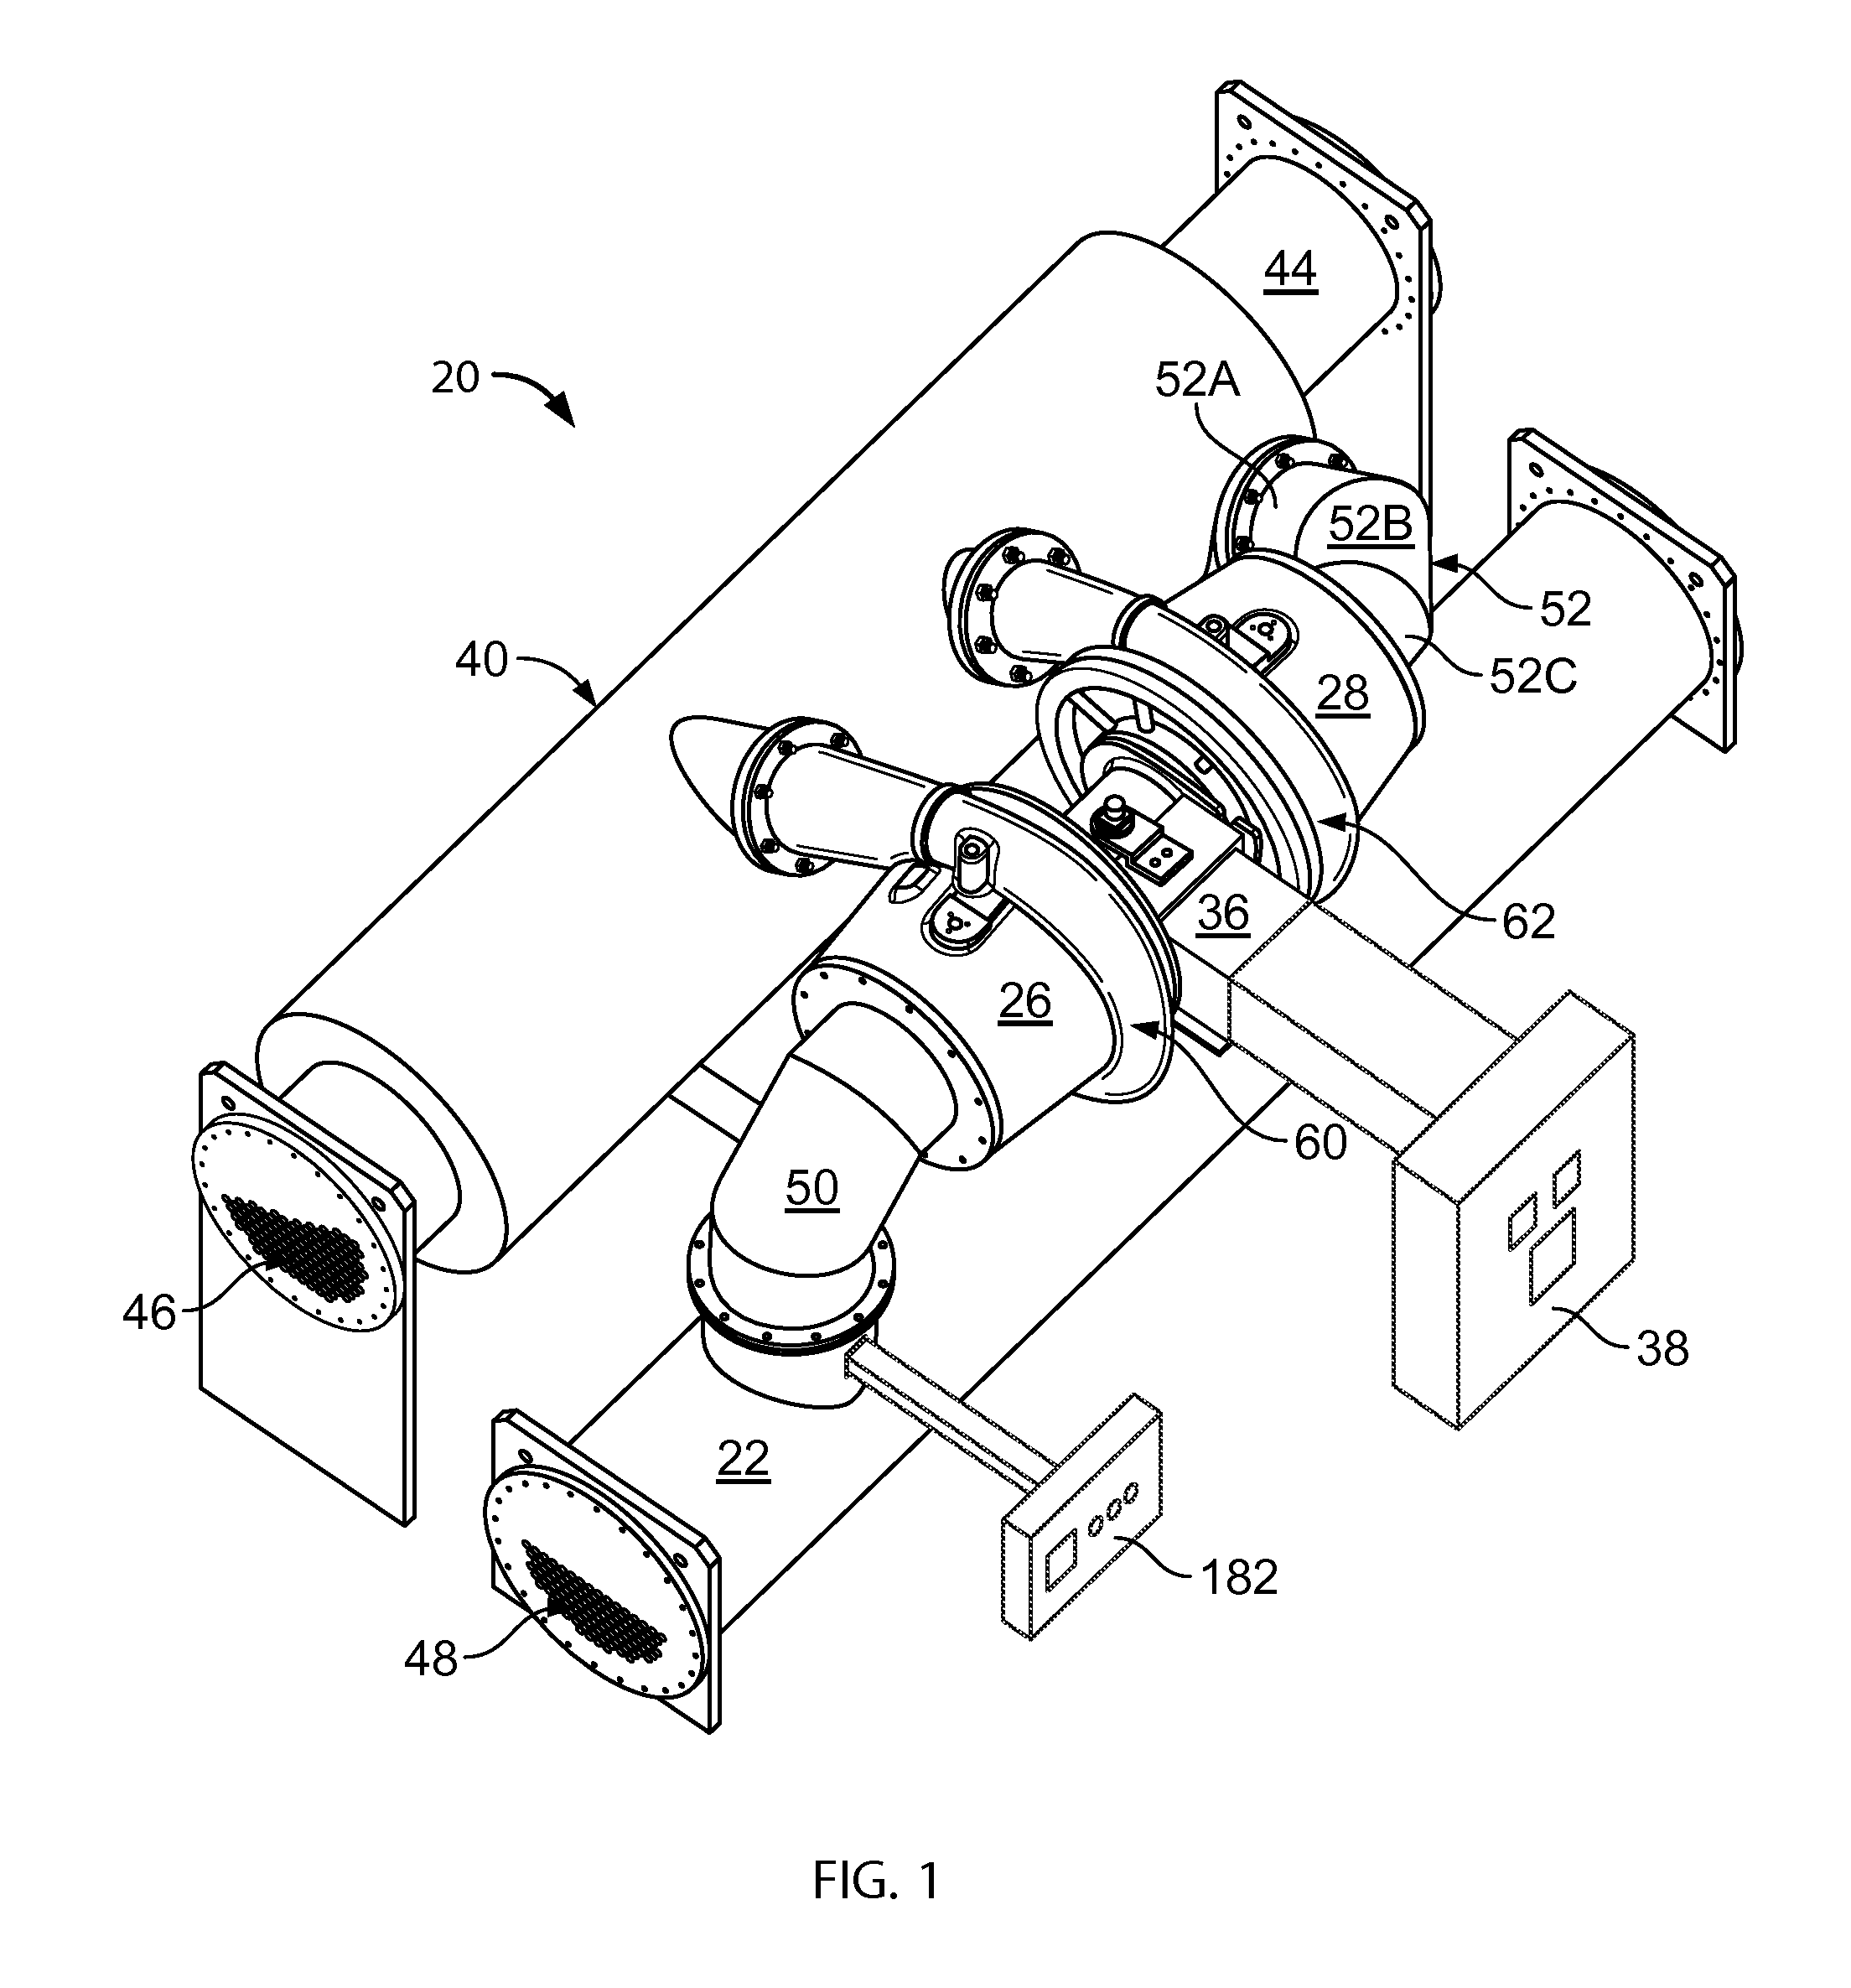 Coaxial economizer assembly and method